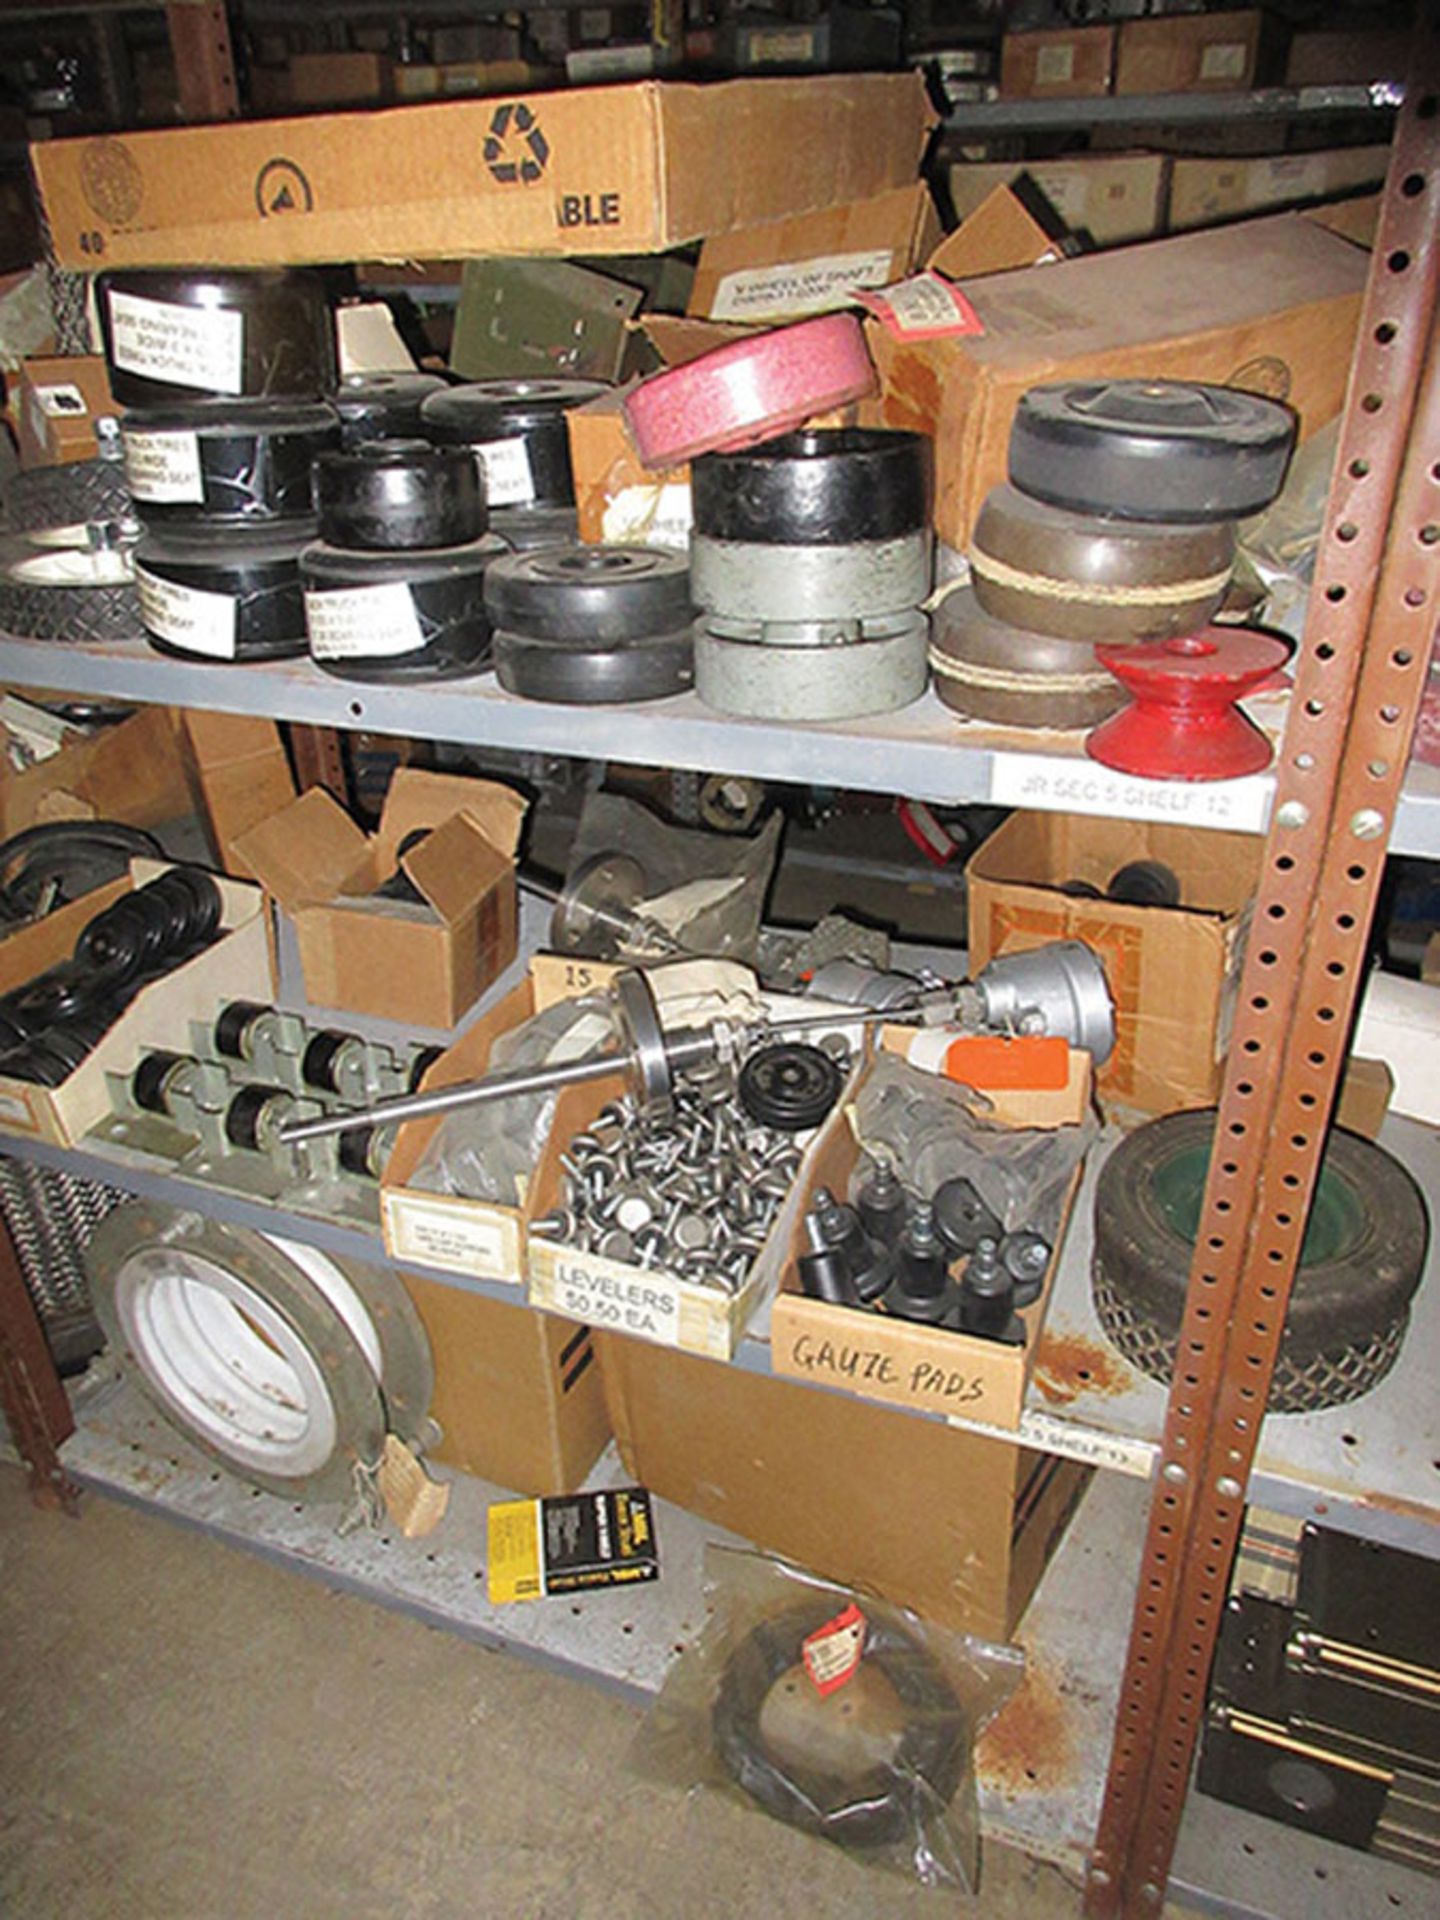 CONTENTS OF LOWER PART (1) SIDE, (4) SECTIONS OF SHELF UNIT: ASSORTMENT OF WHEELS & CASTERS; - Image 2 of 10